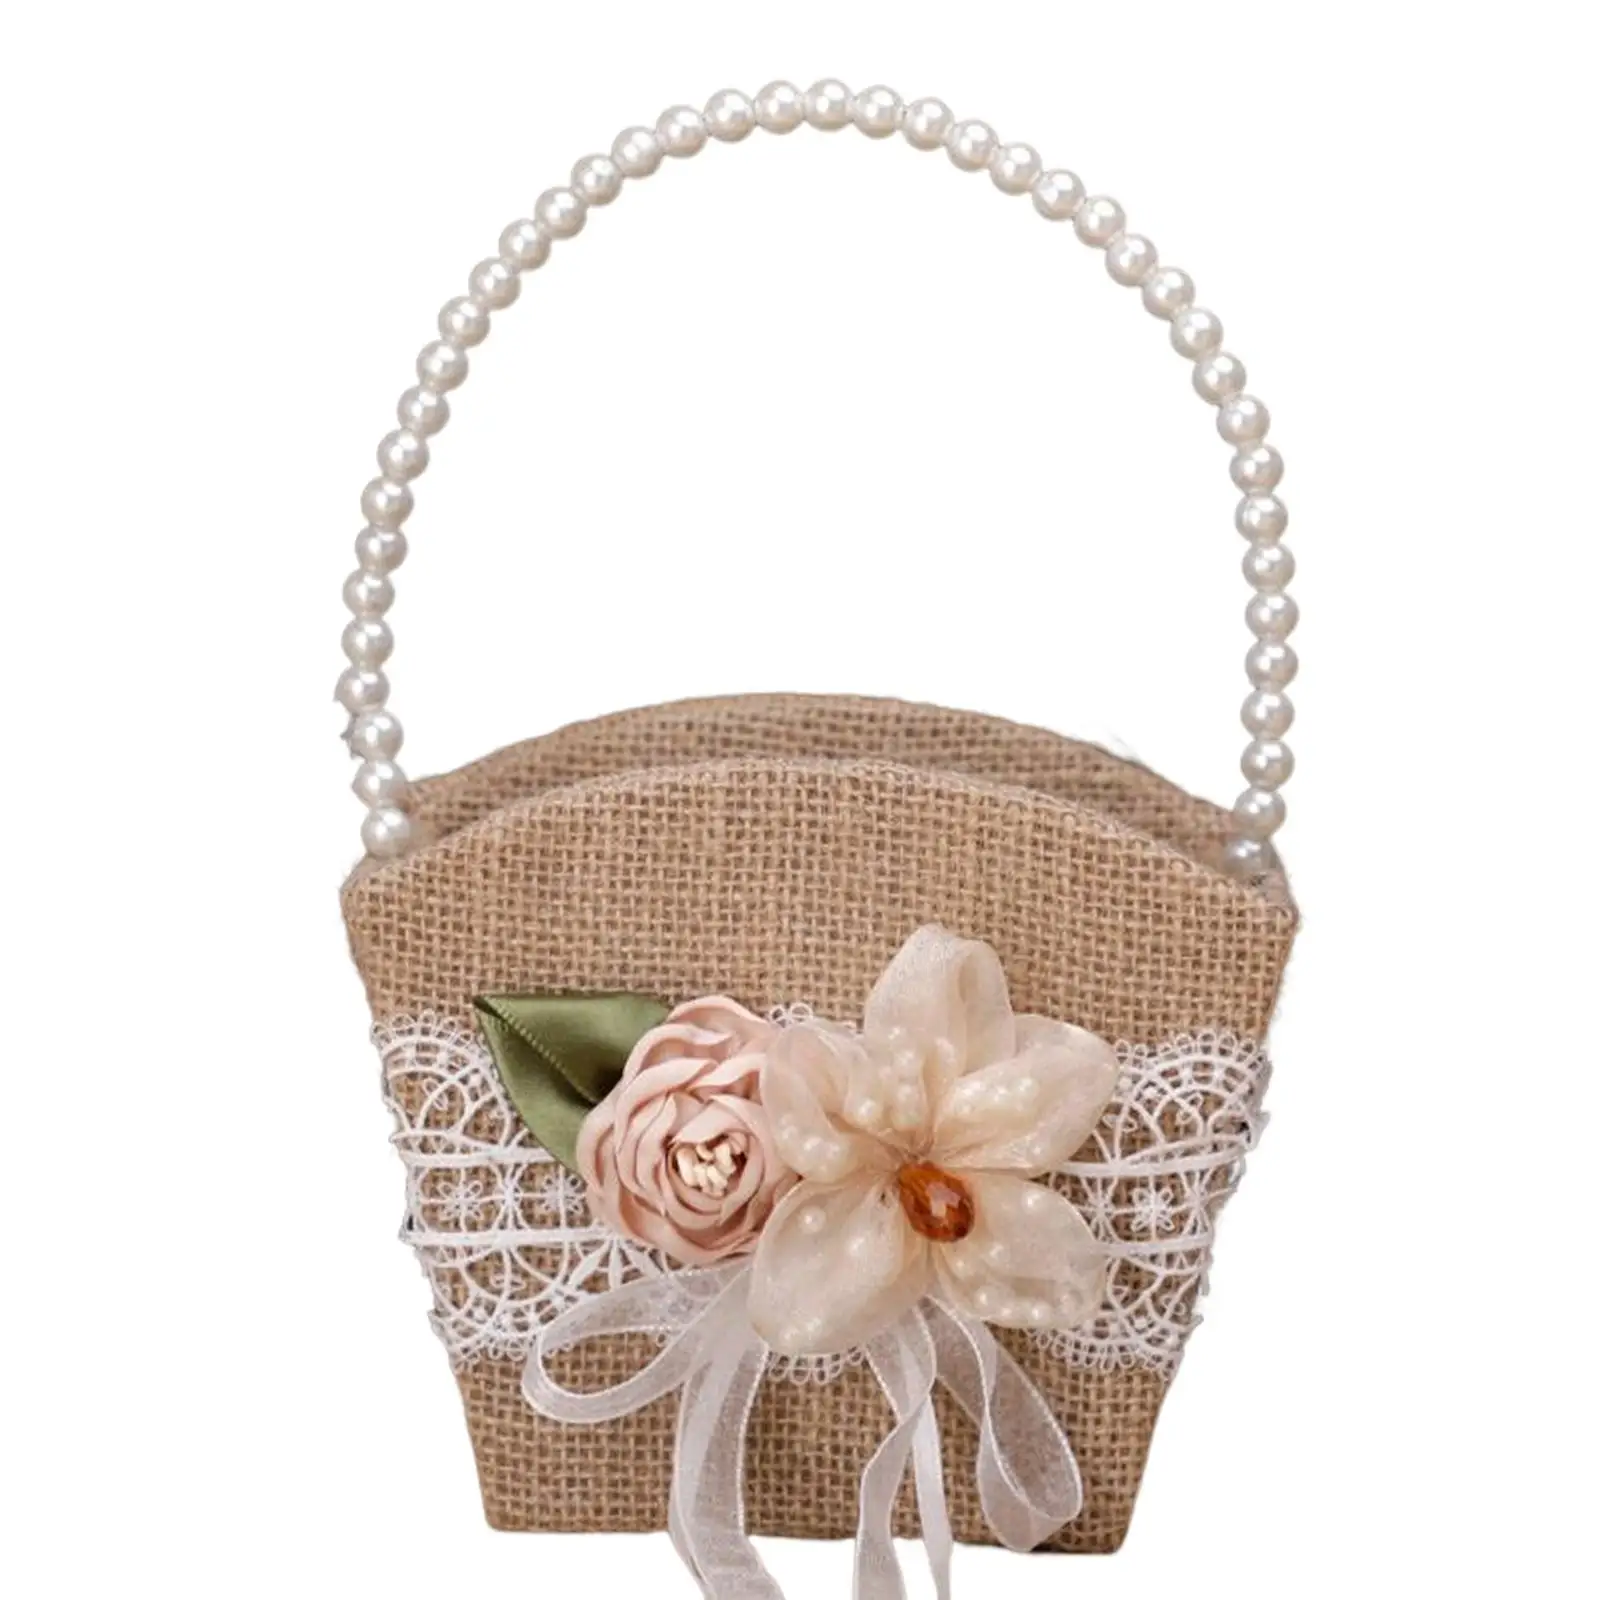 Burlap Flower Basket pearl Handle , Lace Satin Rustic Ribbon for Wedding Ceremony Home Parties